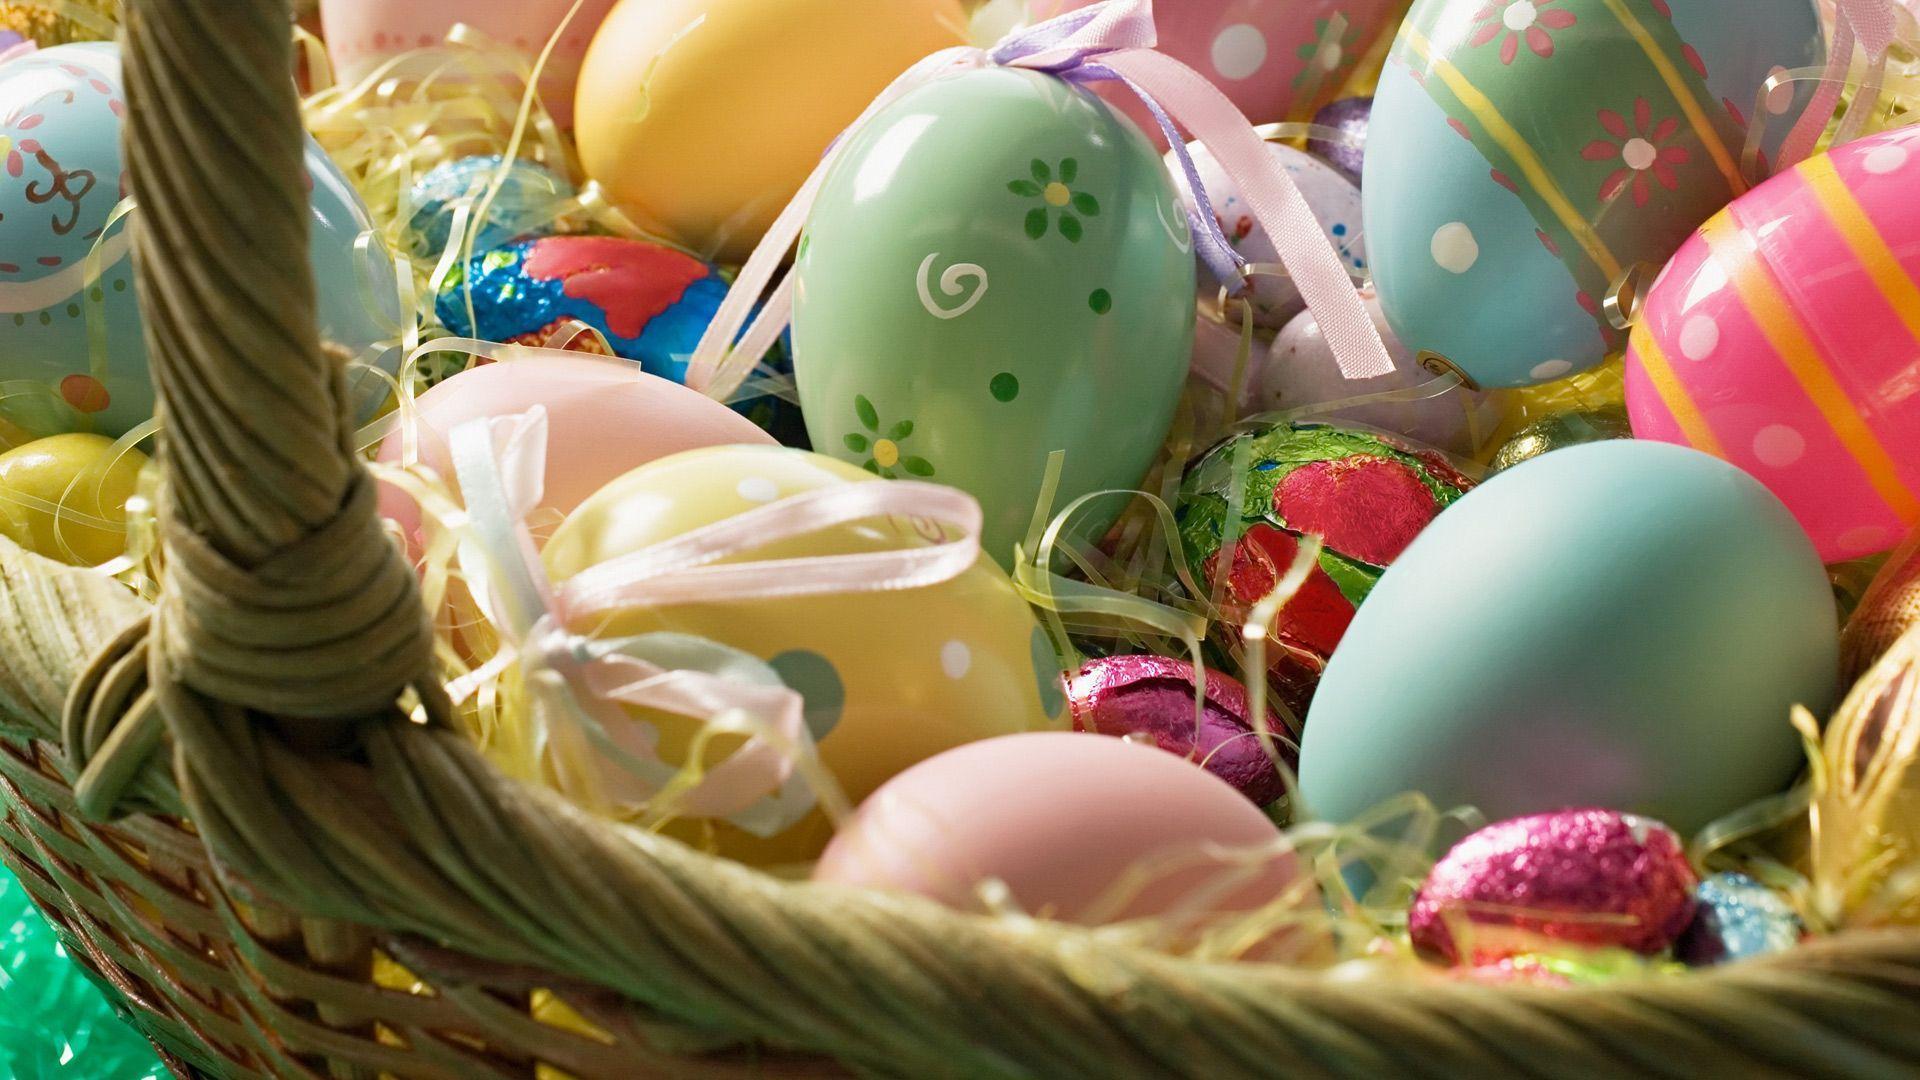 Cute Easter Wallpapers 40282 1920x1080 px ~ HDWallSource